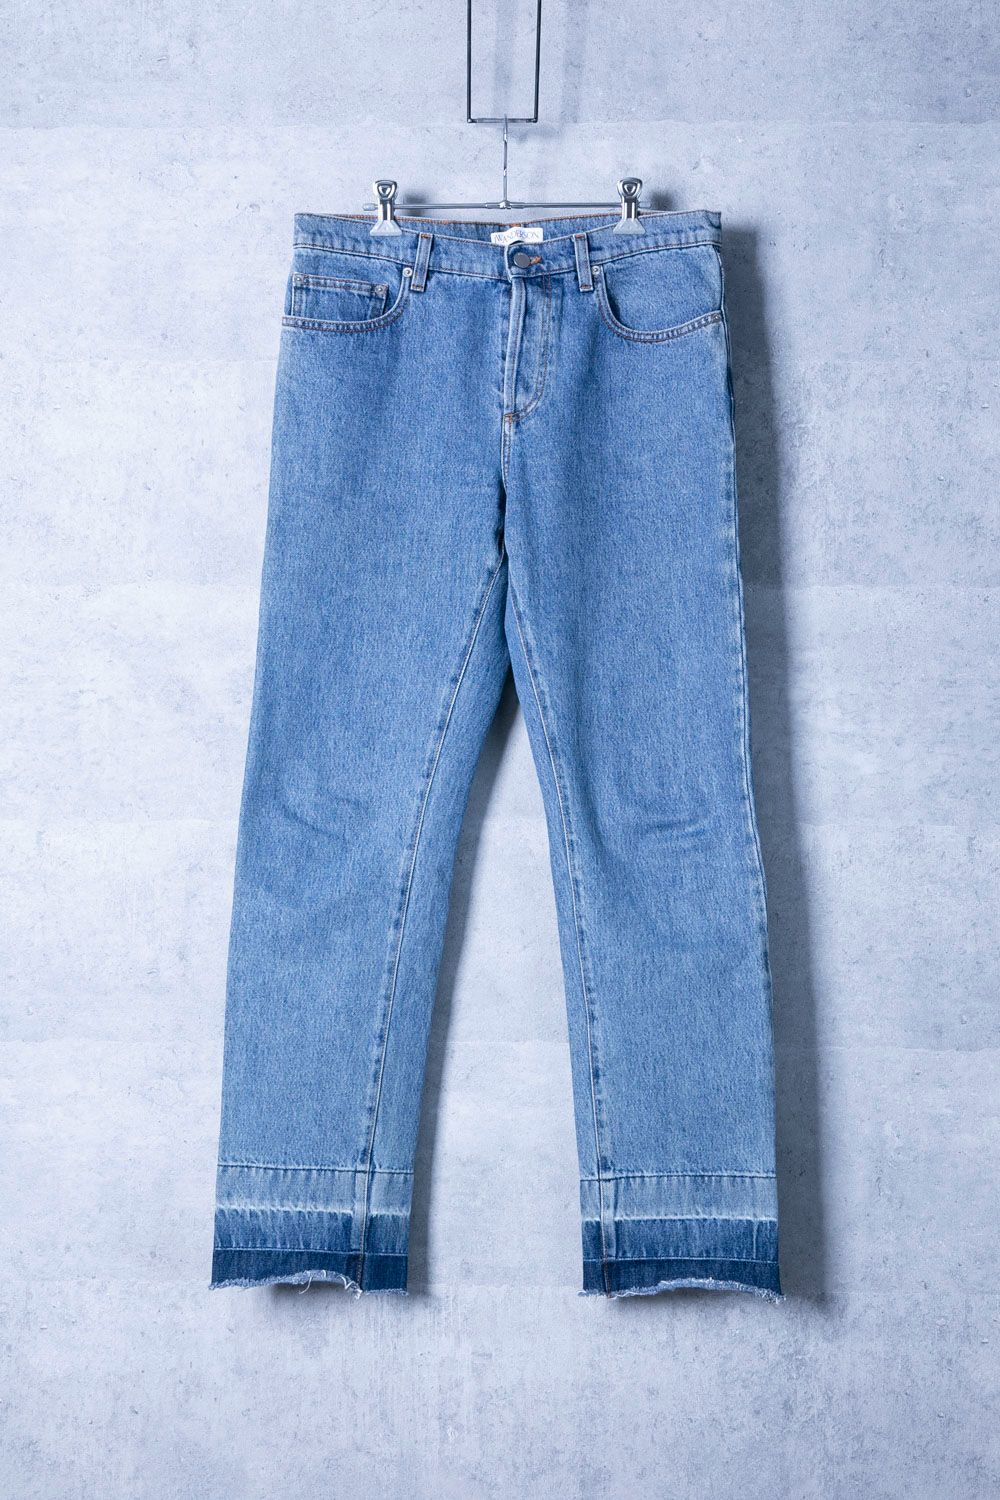 JW Anderson TURN UP SLIM JEANS スリムジーンズ